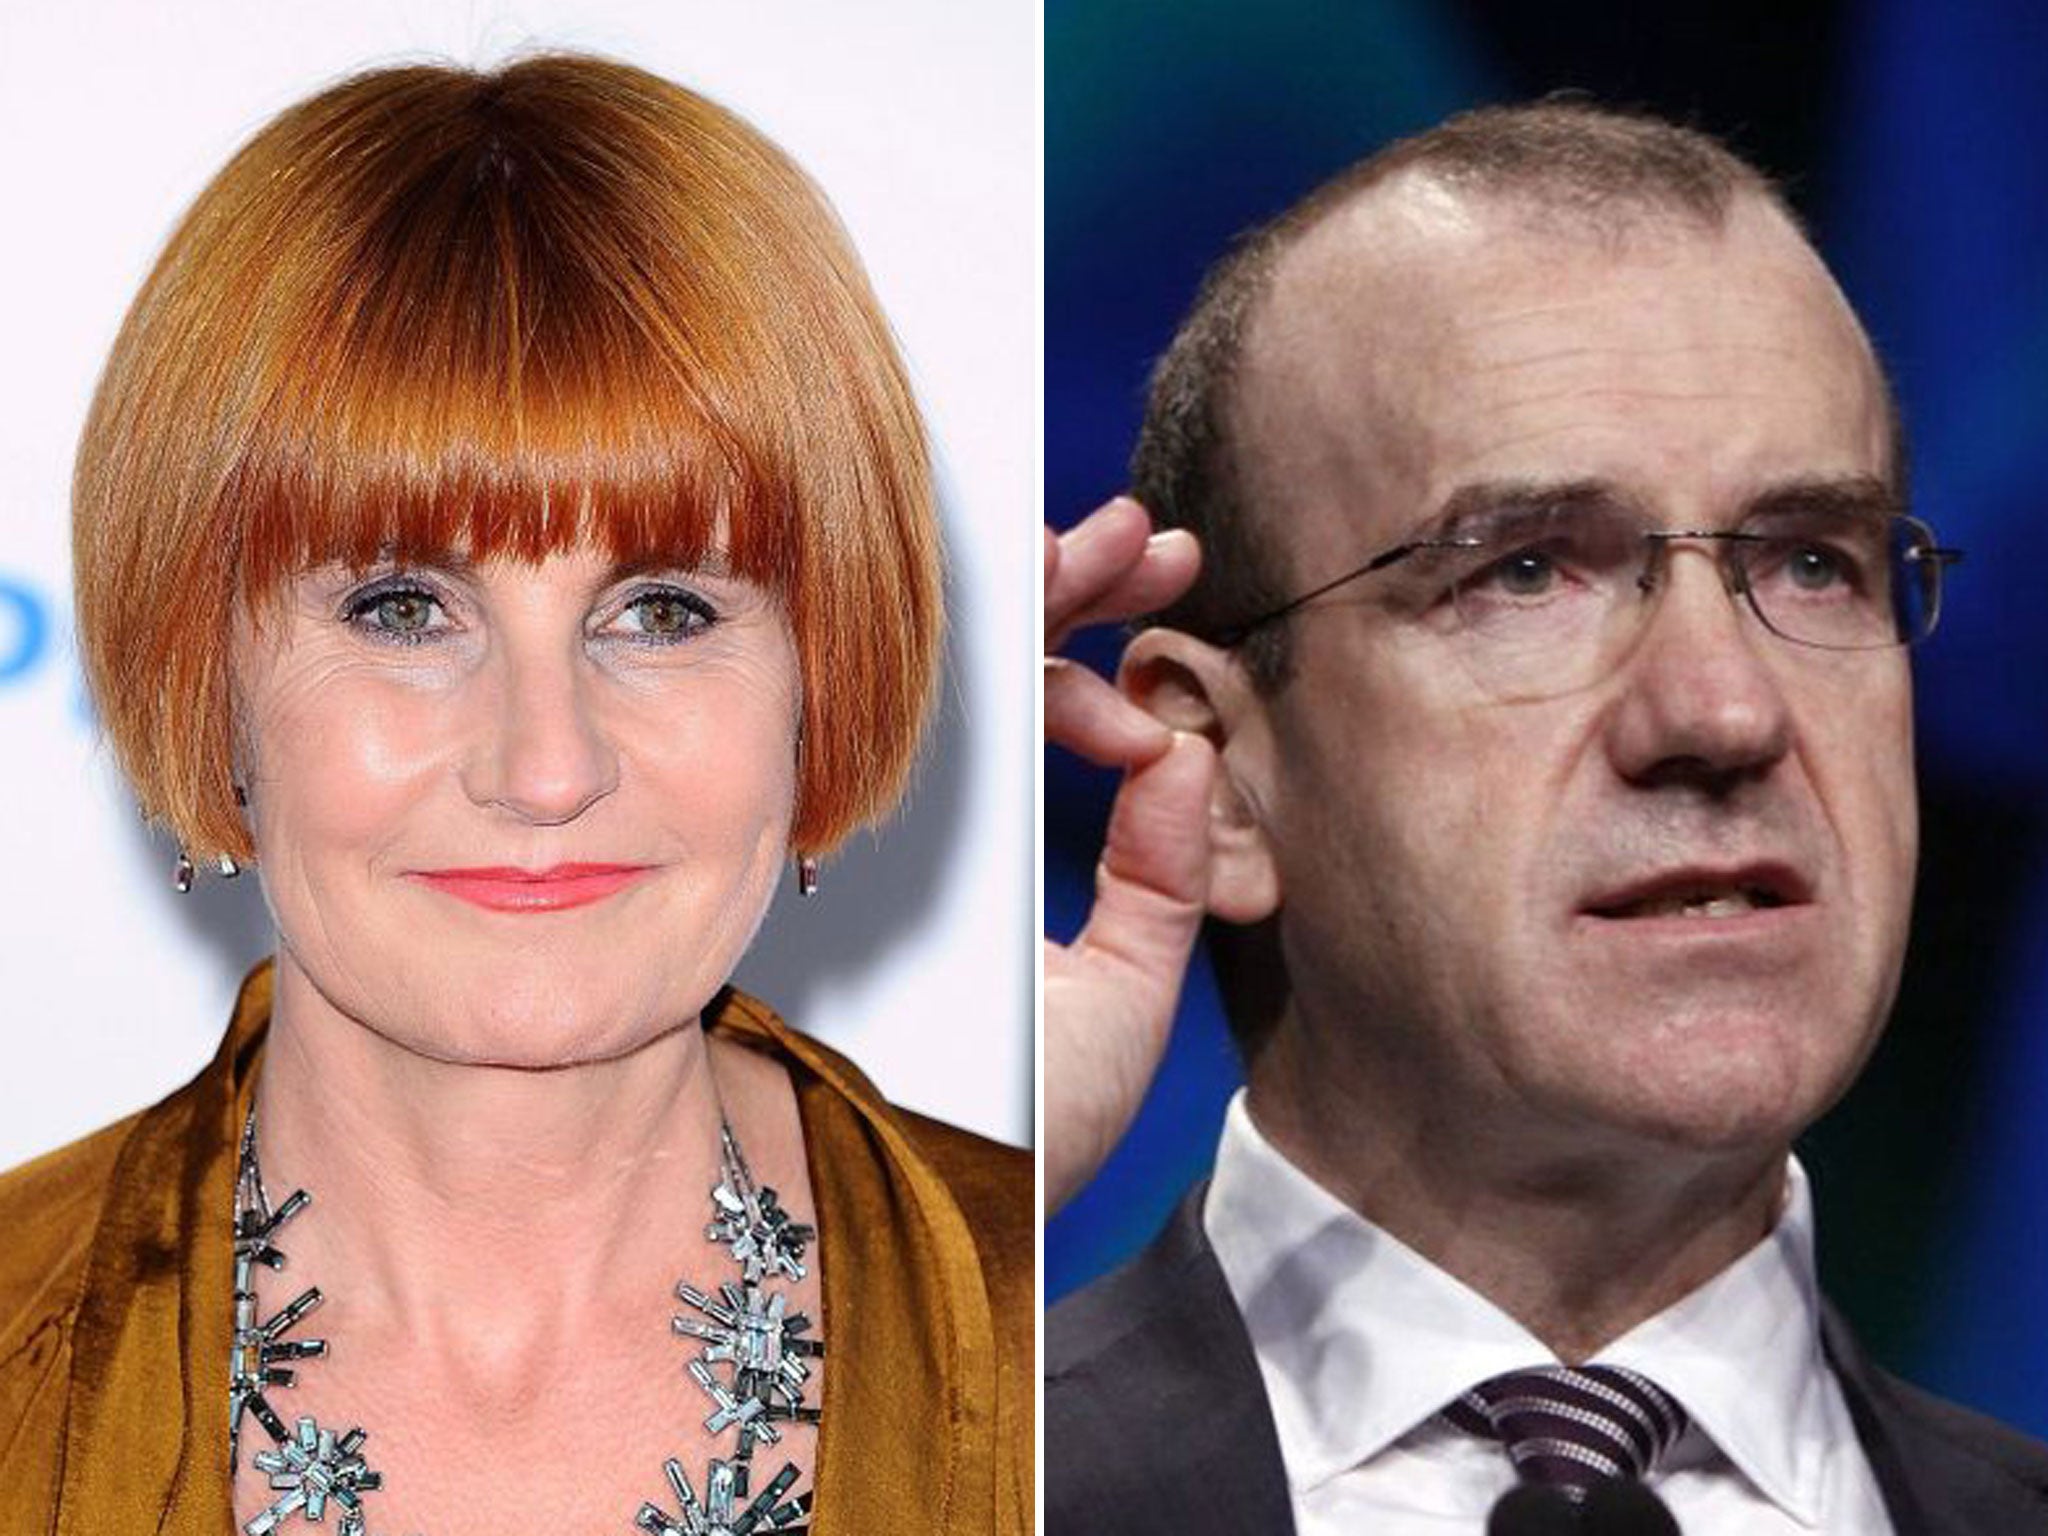 Mary Portas, left, has criticised the former boss of Tesco, Sir Terry Leahy, right, after he defended the dominance of supermarkets